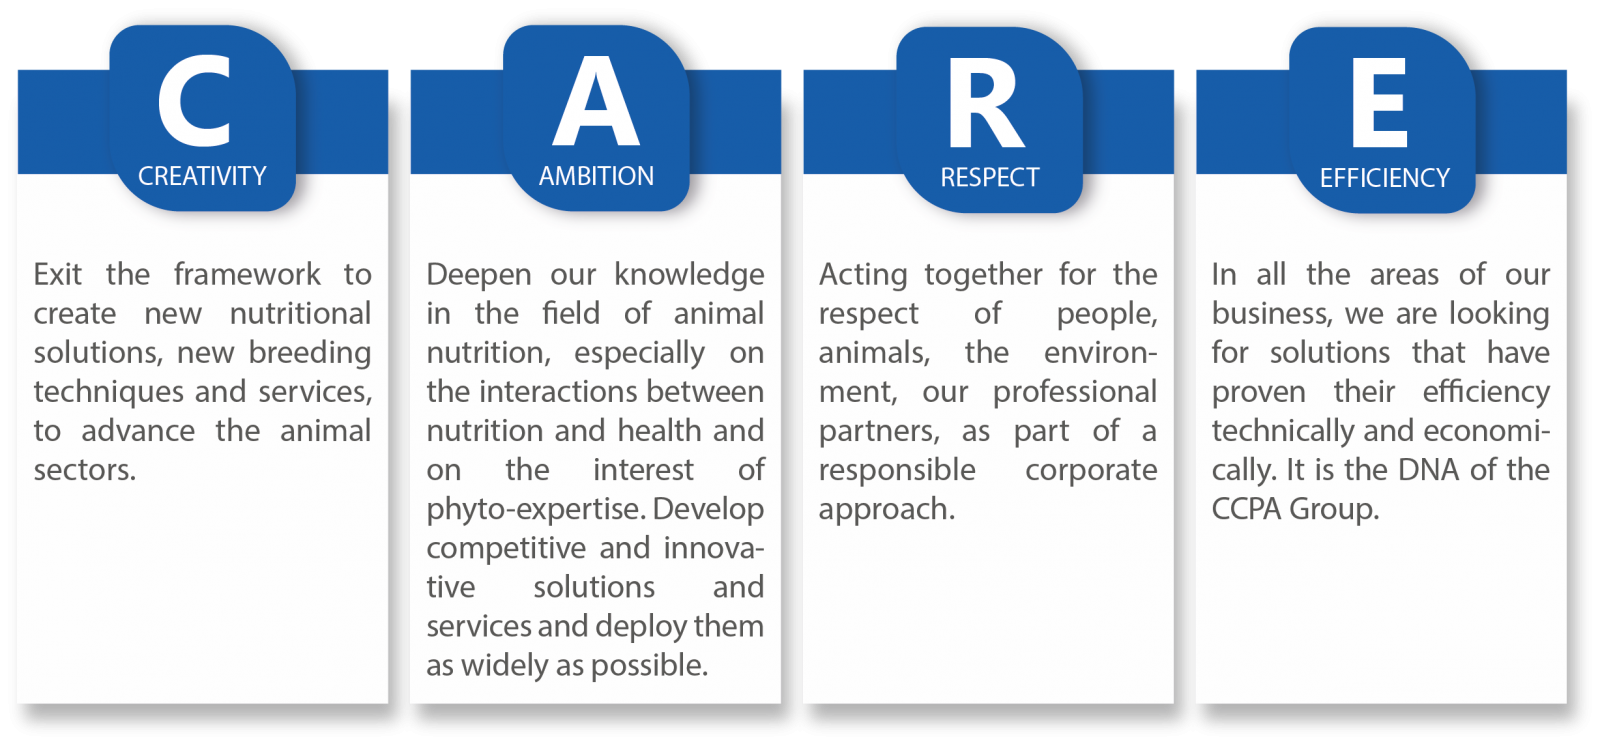 CCPA group's values, CARE : creativity ambition respect and efficiency